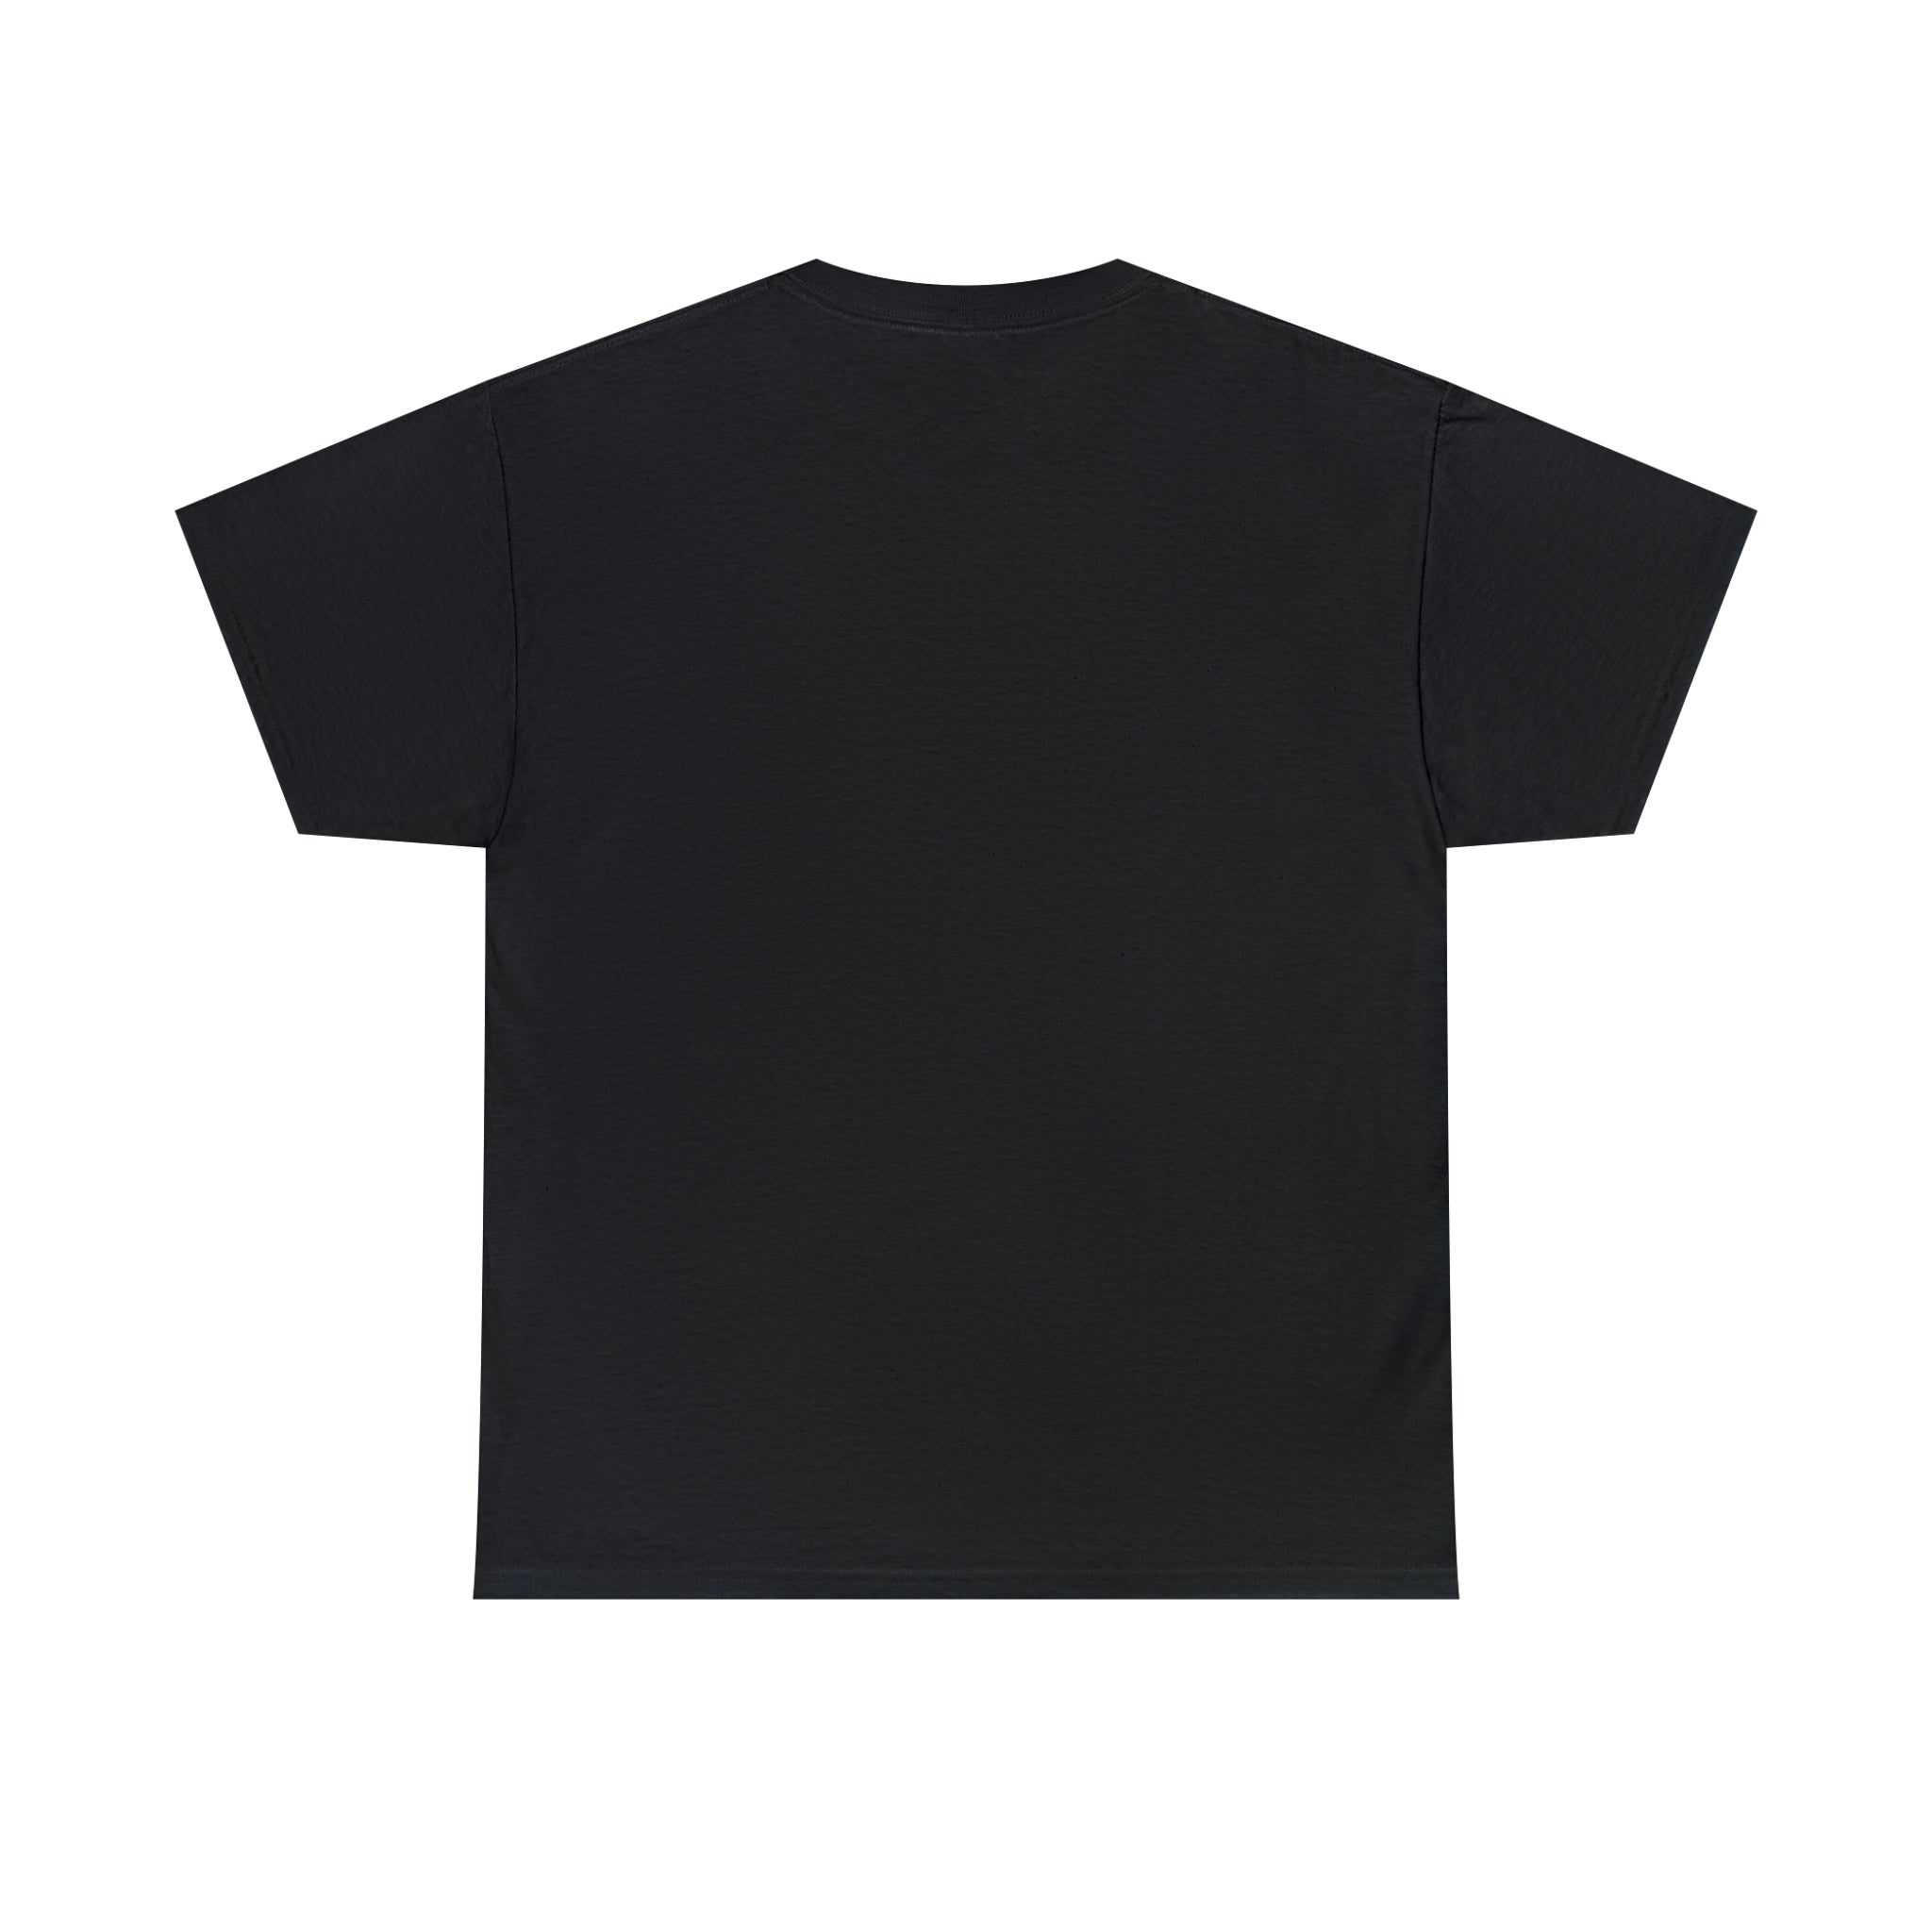 I'm doing it from Scratch Black t-shirt Back